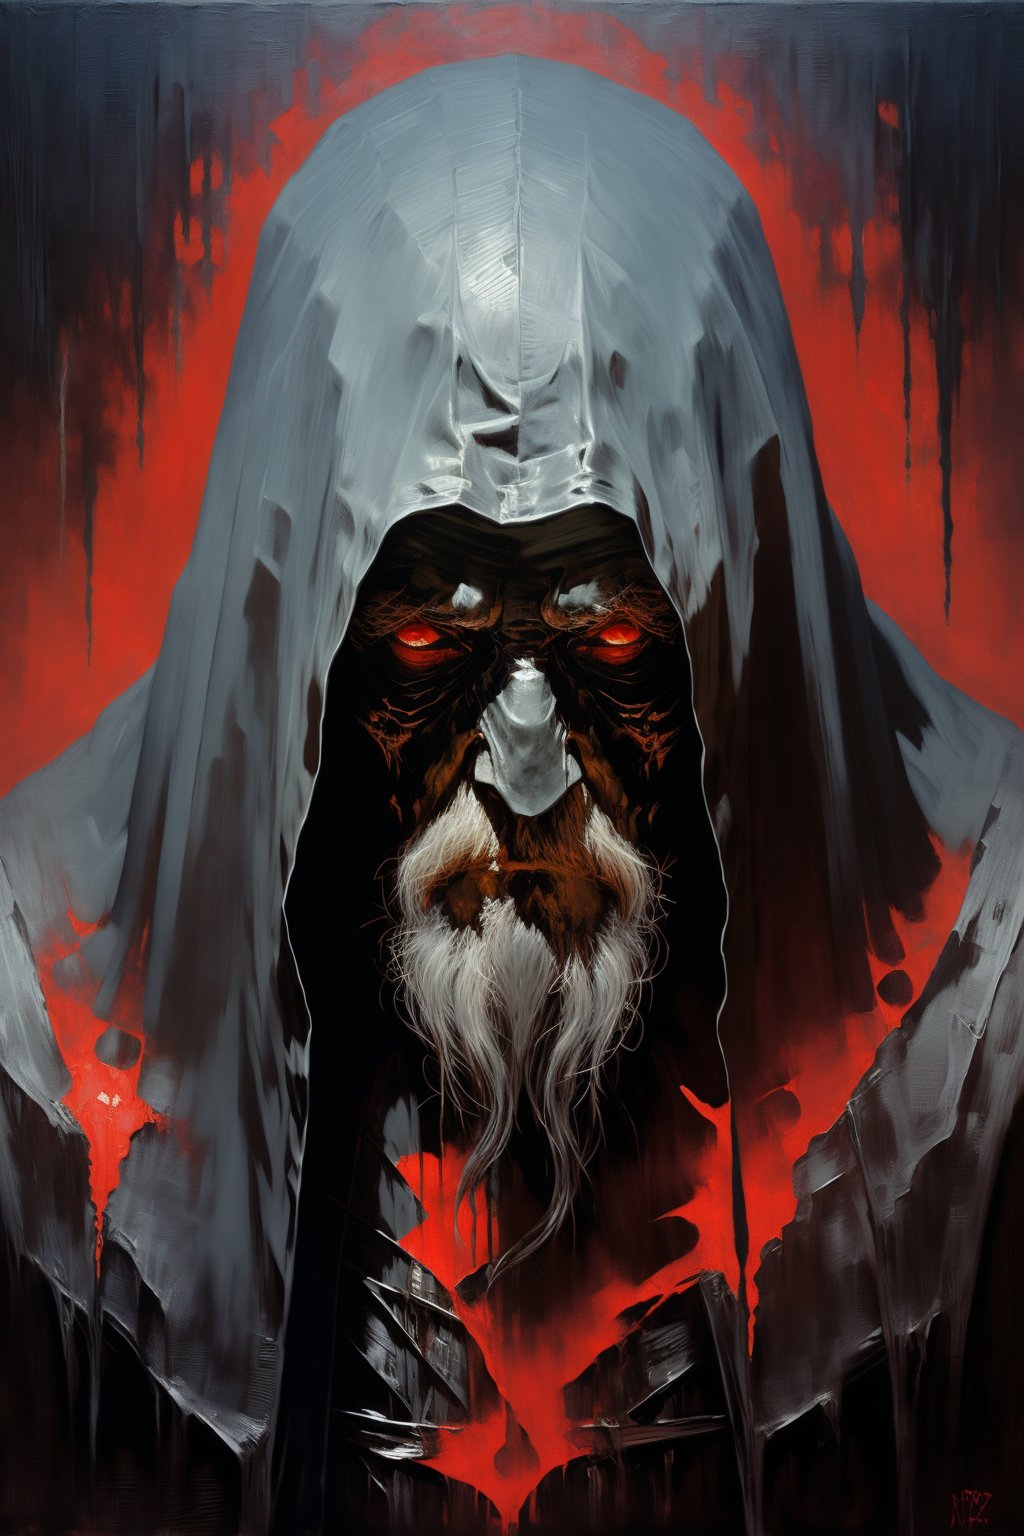 masterpiece, best quality, old man wearing a black cape, black hood, dark atmosphere, macabre, red theme, (oil painting)